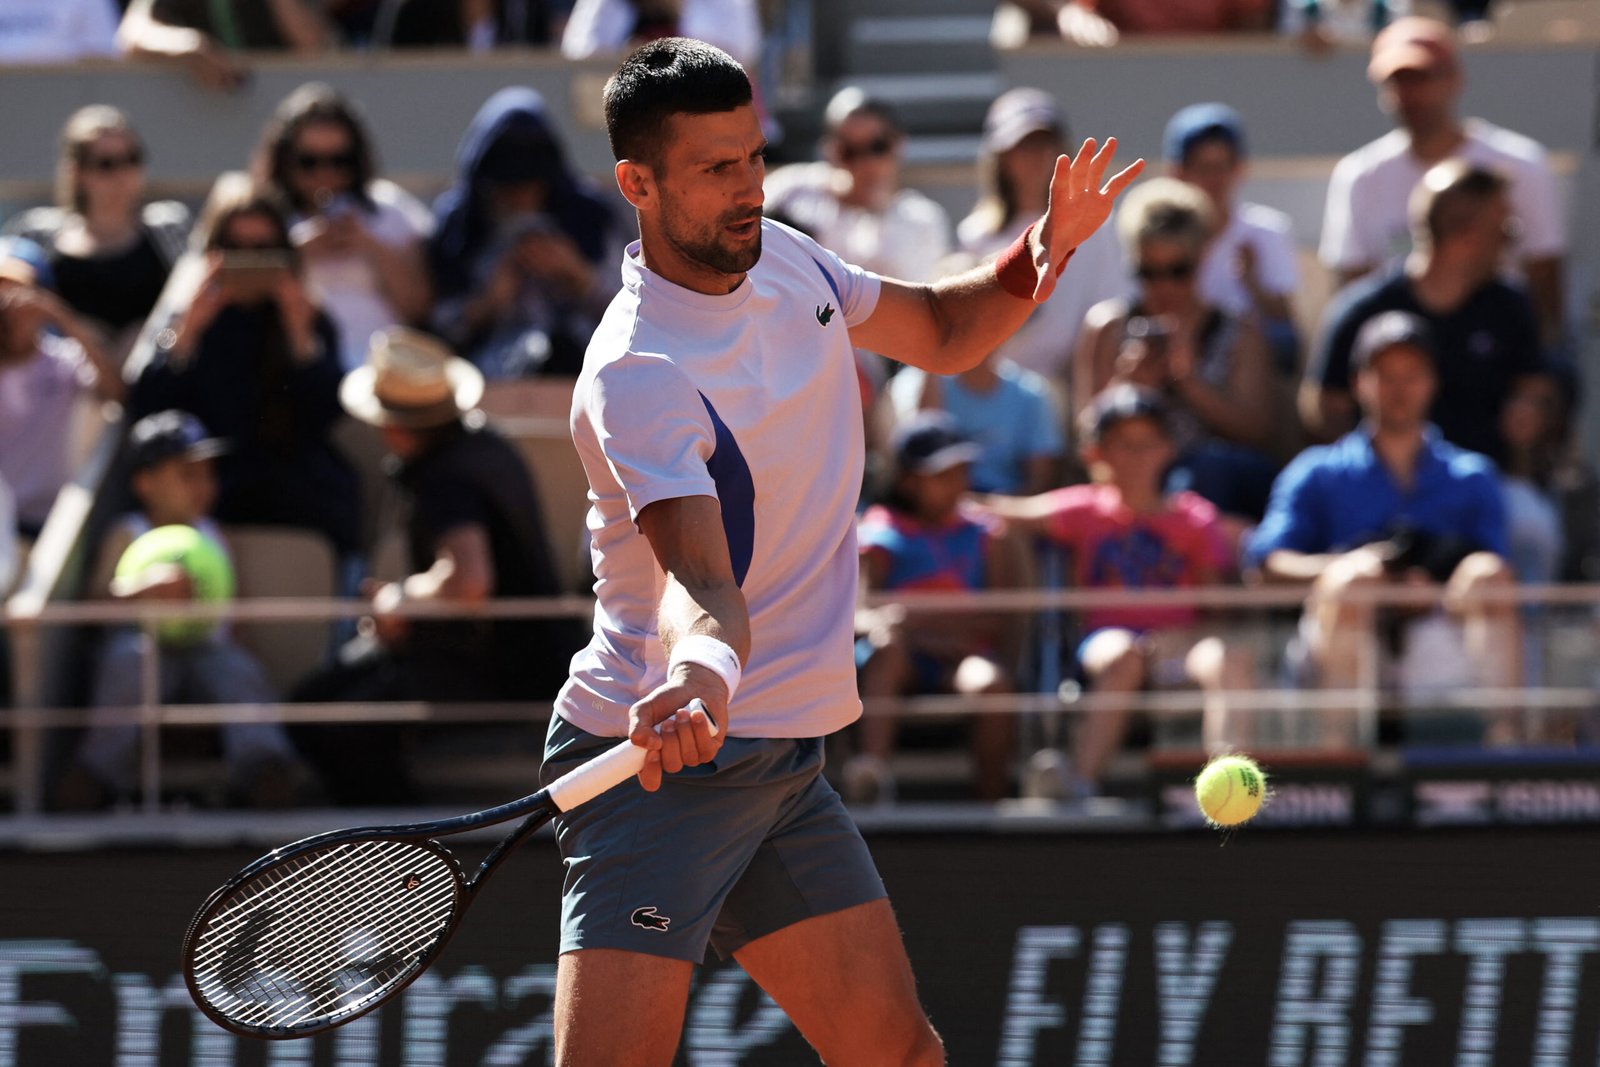 Djokovic looks to overcome ‘bumps in road’ at French Open